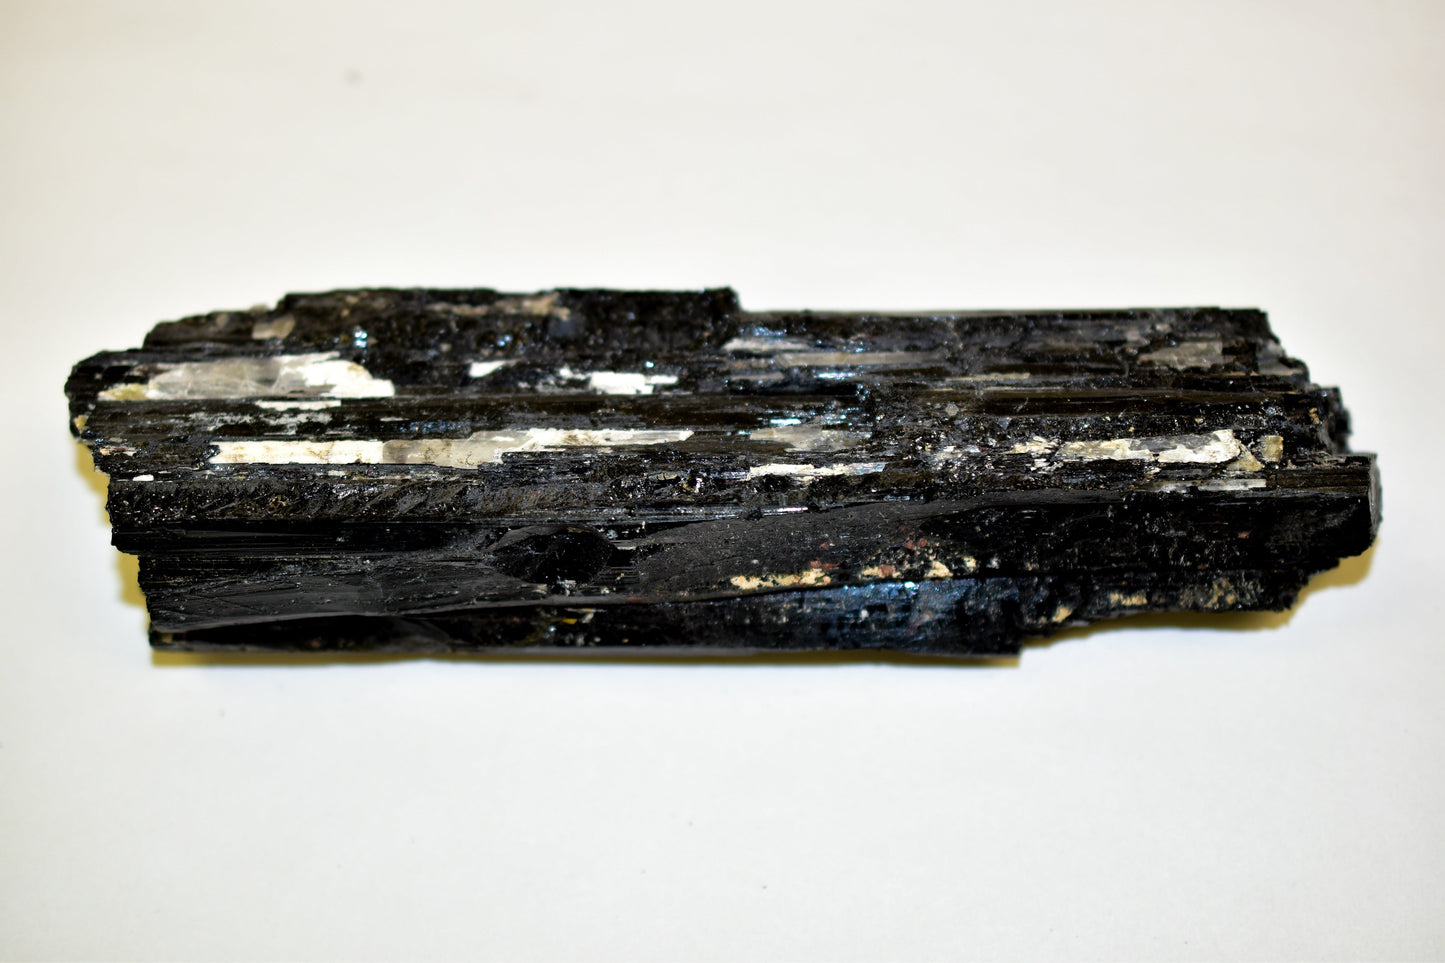 Black Tourmaline Large Pieces for Display at Home or Office by Whyte Quartz